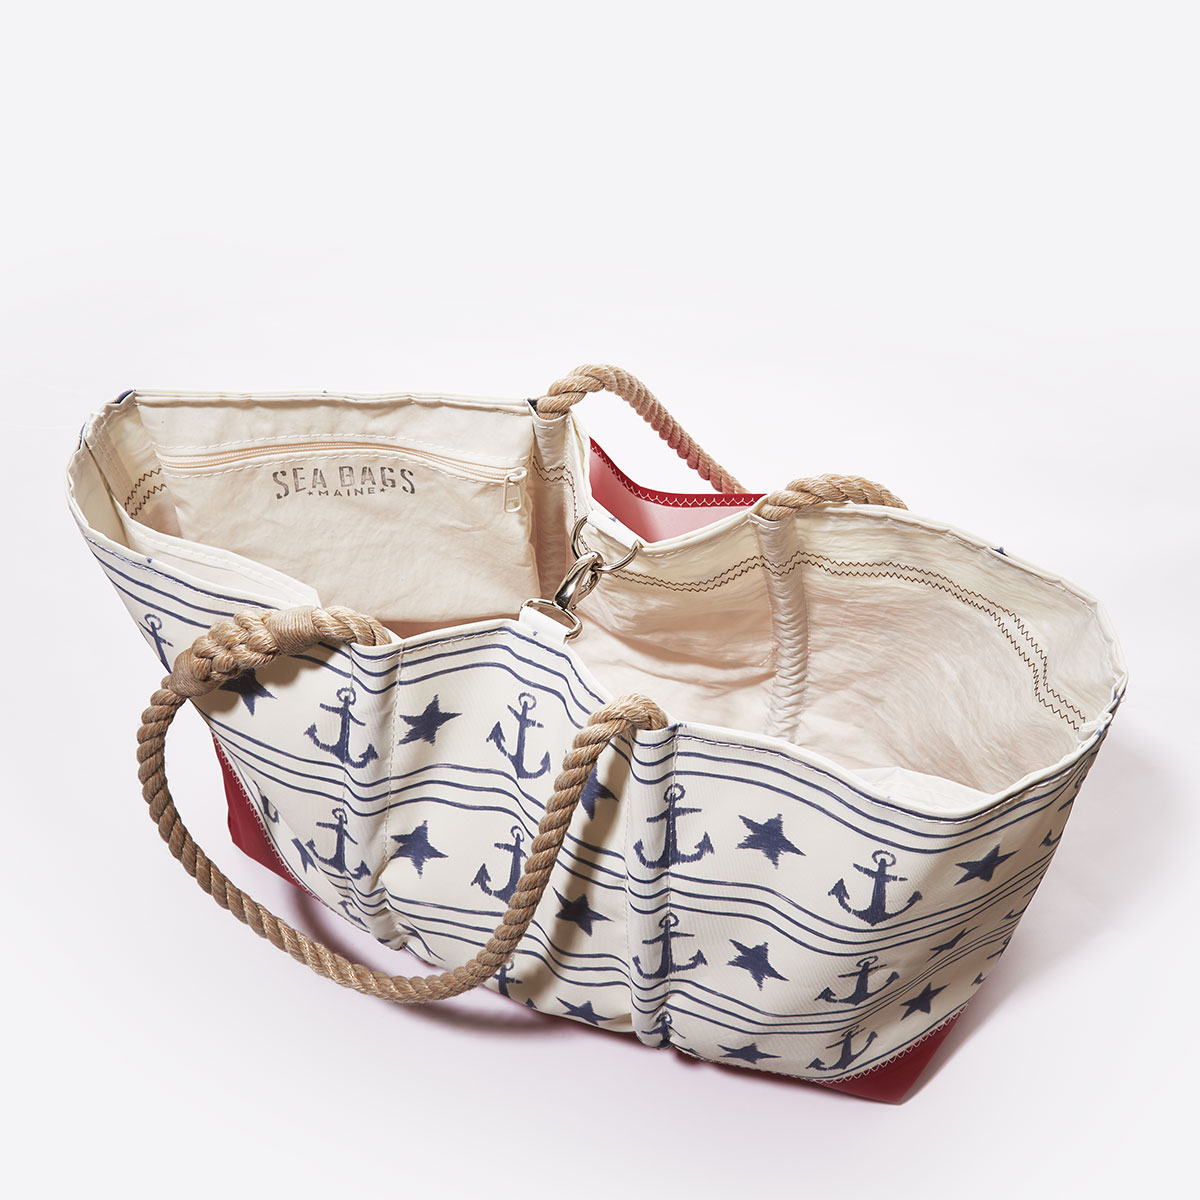 clasp closure, blue anchors stars and stripes line this recycled sail cloth tote with a red bottom and hemp rope handles